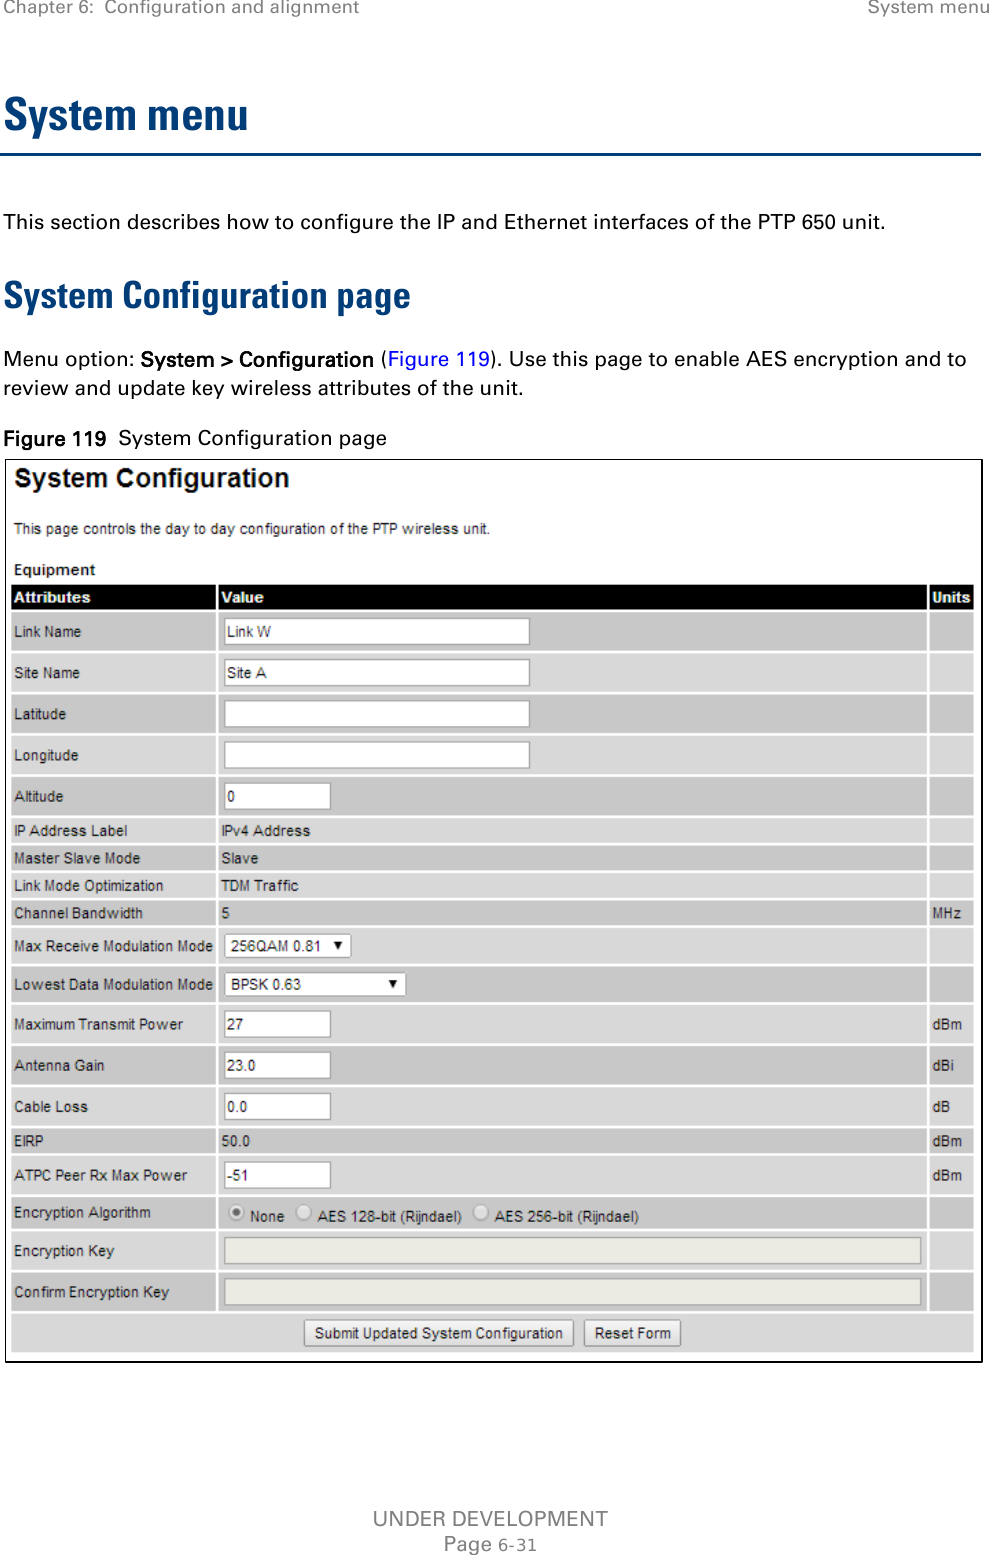 Chapter 6:  Configuration and alignment  System menu  System menu This section describes how to configure the IP and Ethernet interfaces of the PTP 650 unit. System Configuration page Menu option: System &gt; Configuration (Figure 119). Use this page to enable AES encryption and to review and update key wireless attributes of the unit. Figure 119  System Configuration page   UNDER DEVELOPMENT Page 6-31 